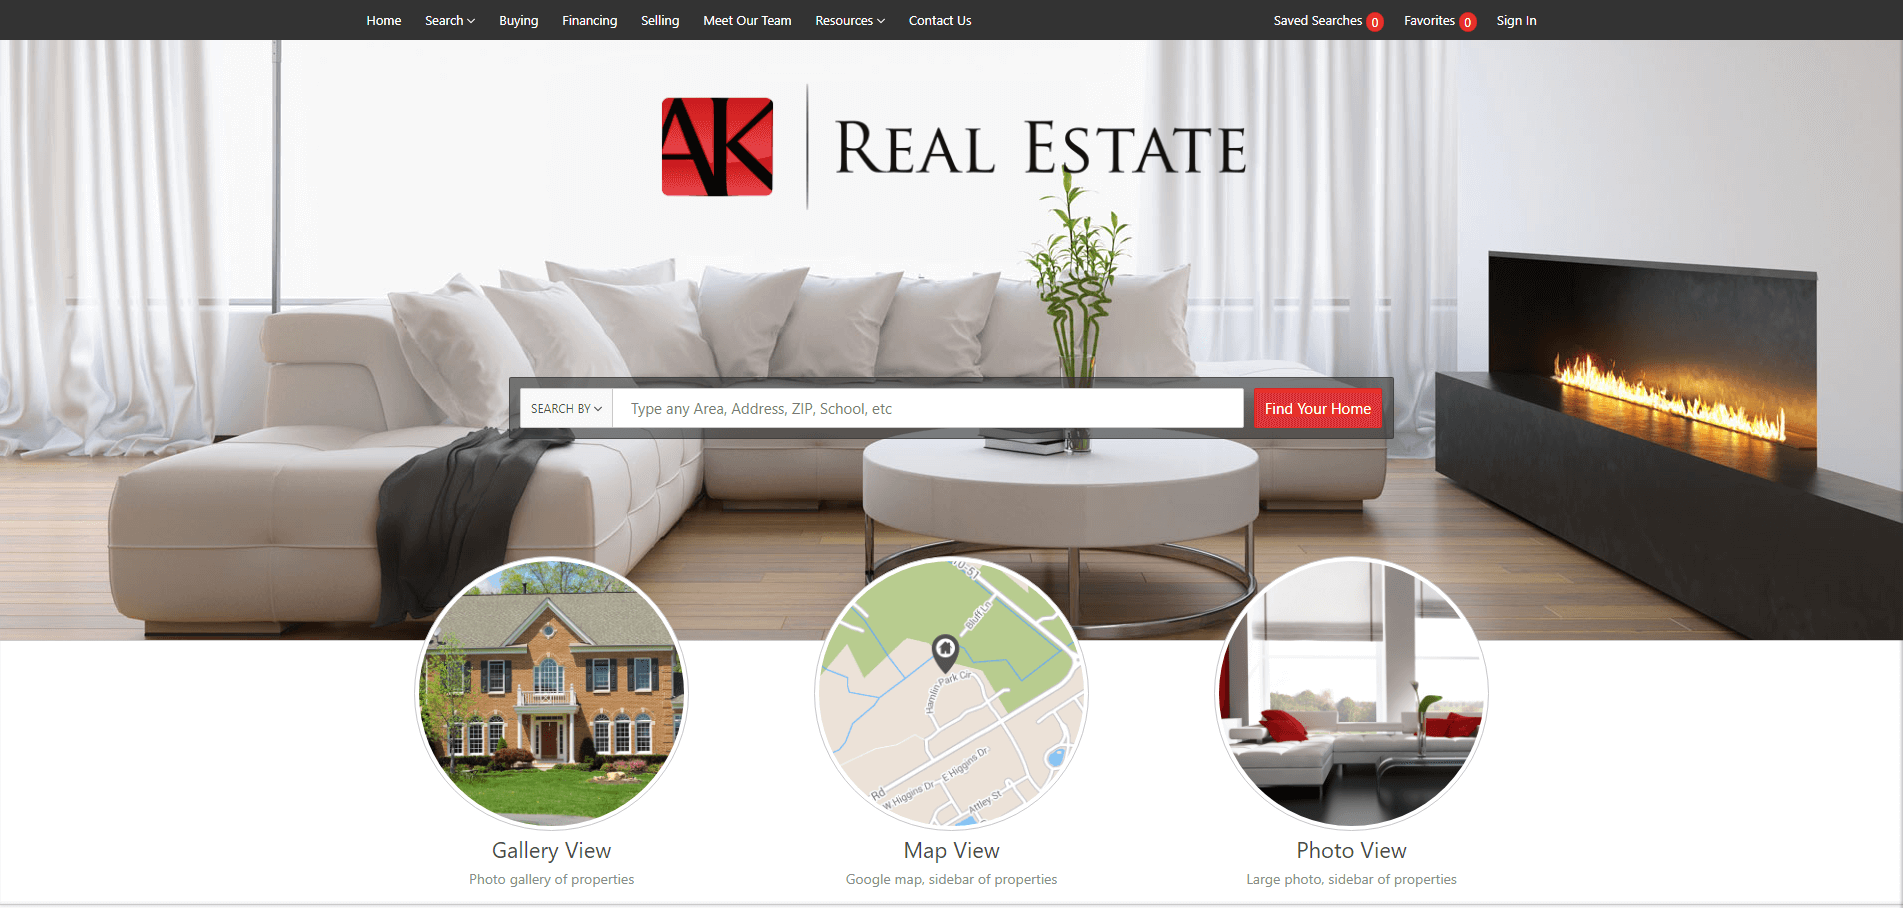  Awesome!  We made a list of the 101 best real estate websites.  Here's a-krealestate.com.  Did your site make the list? 